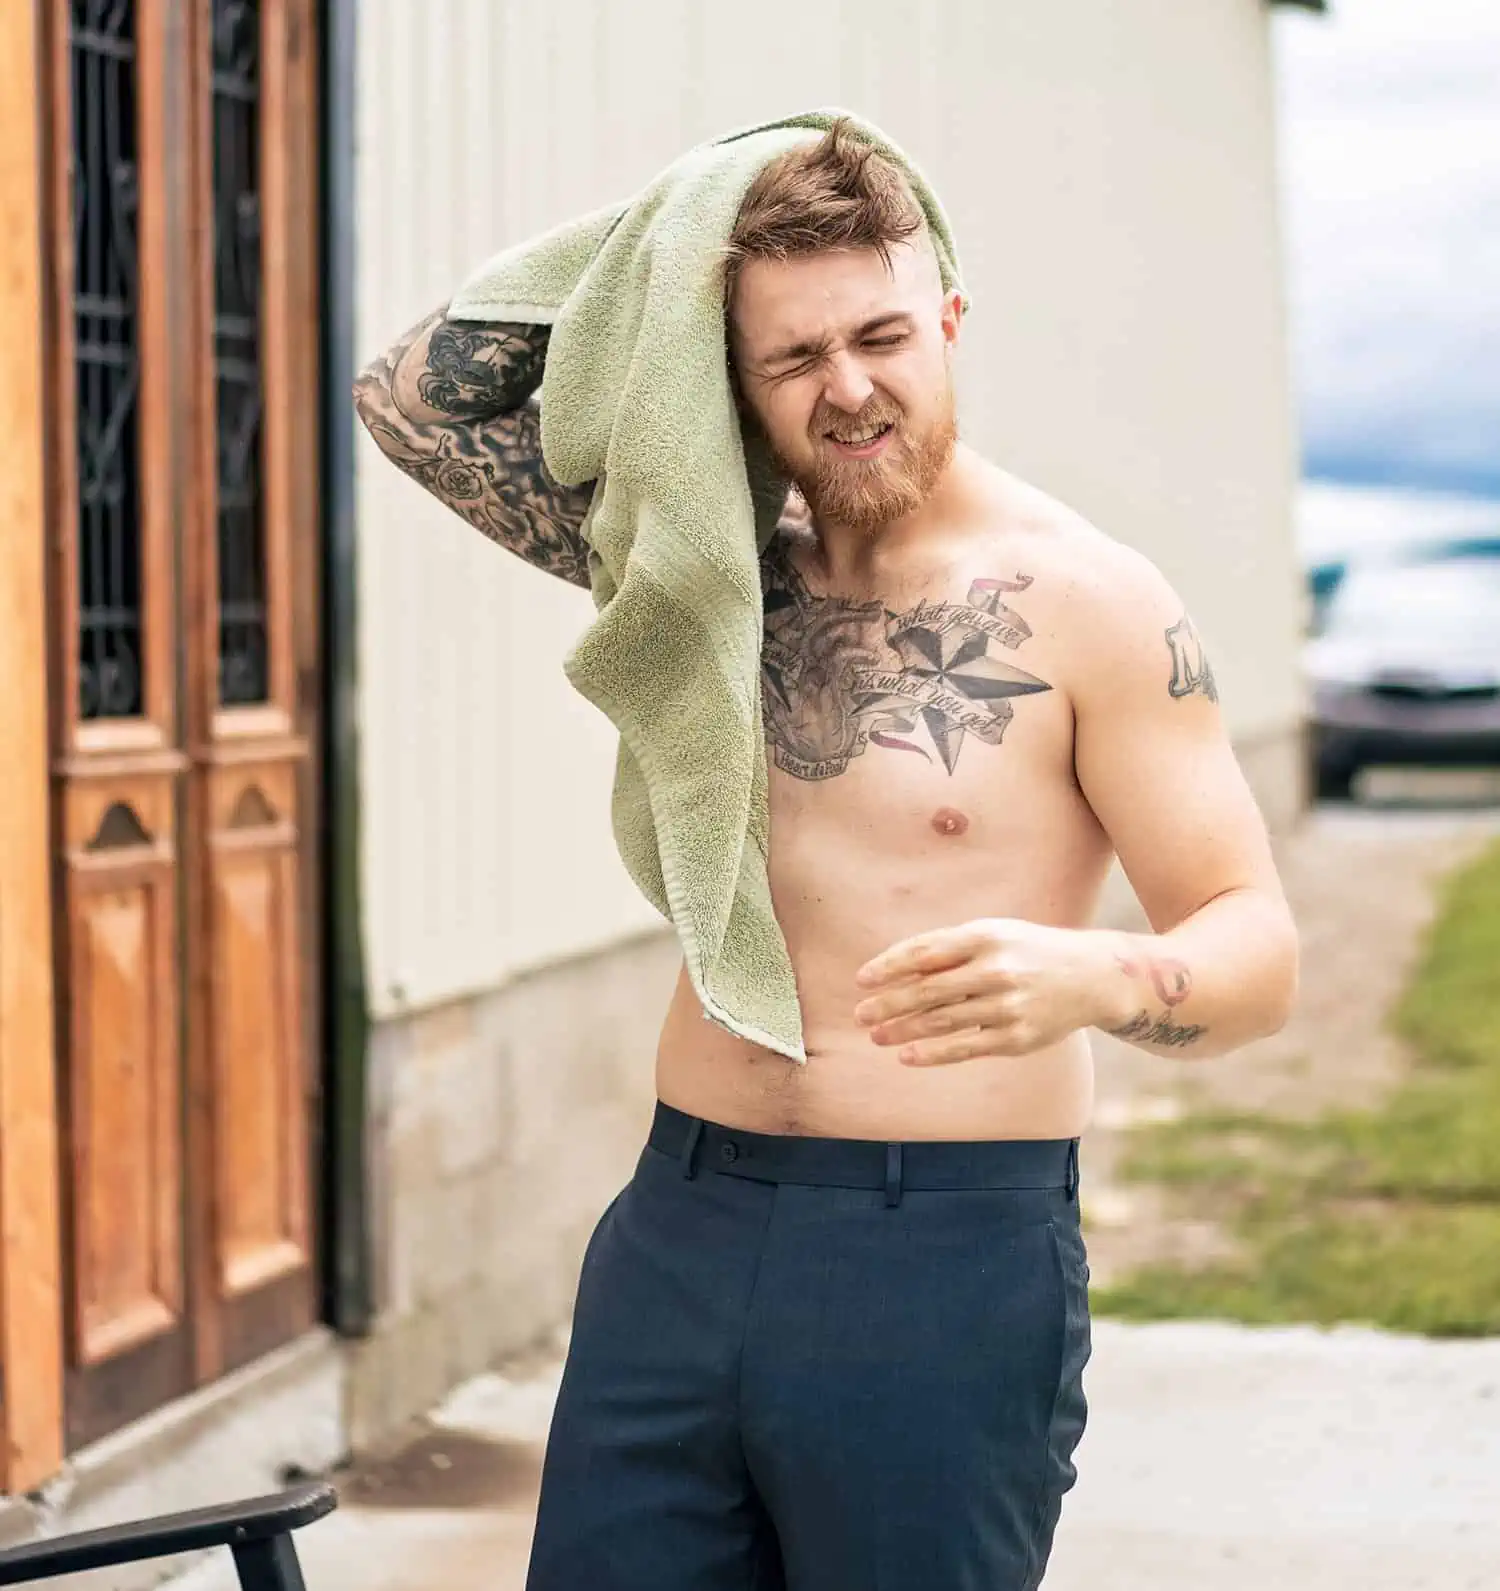 A man with tattoos is drying his hair with a towel.